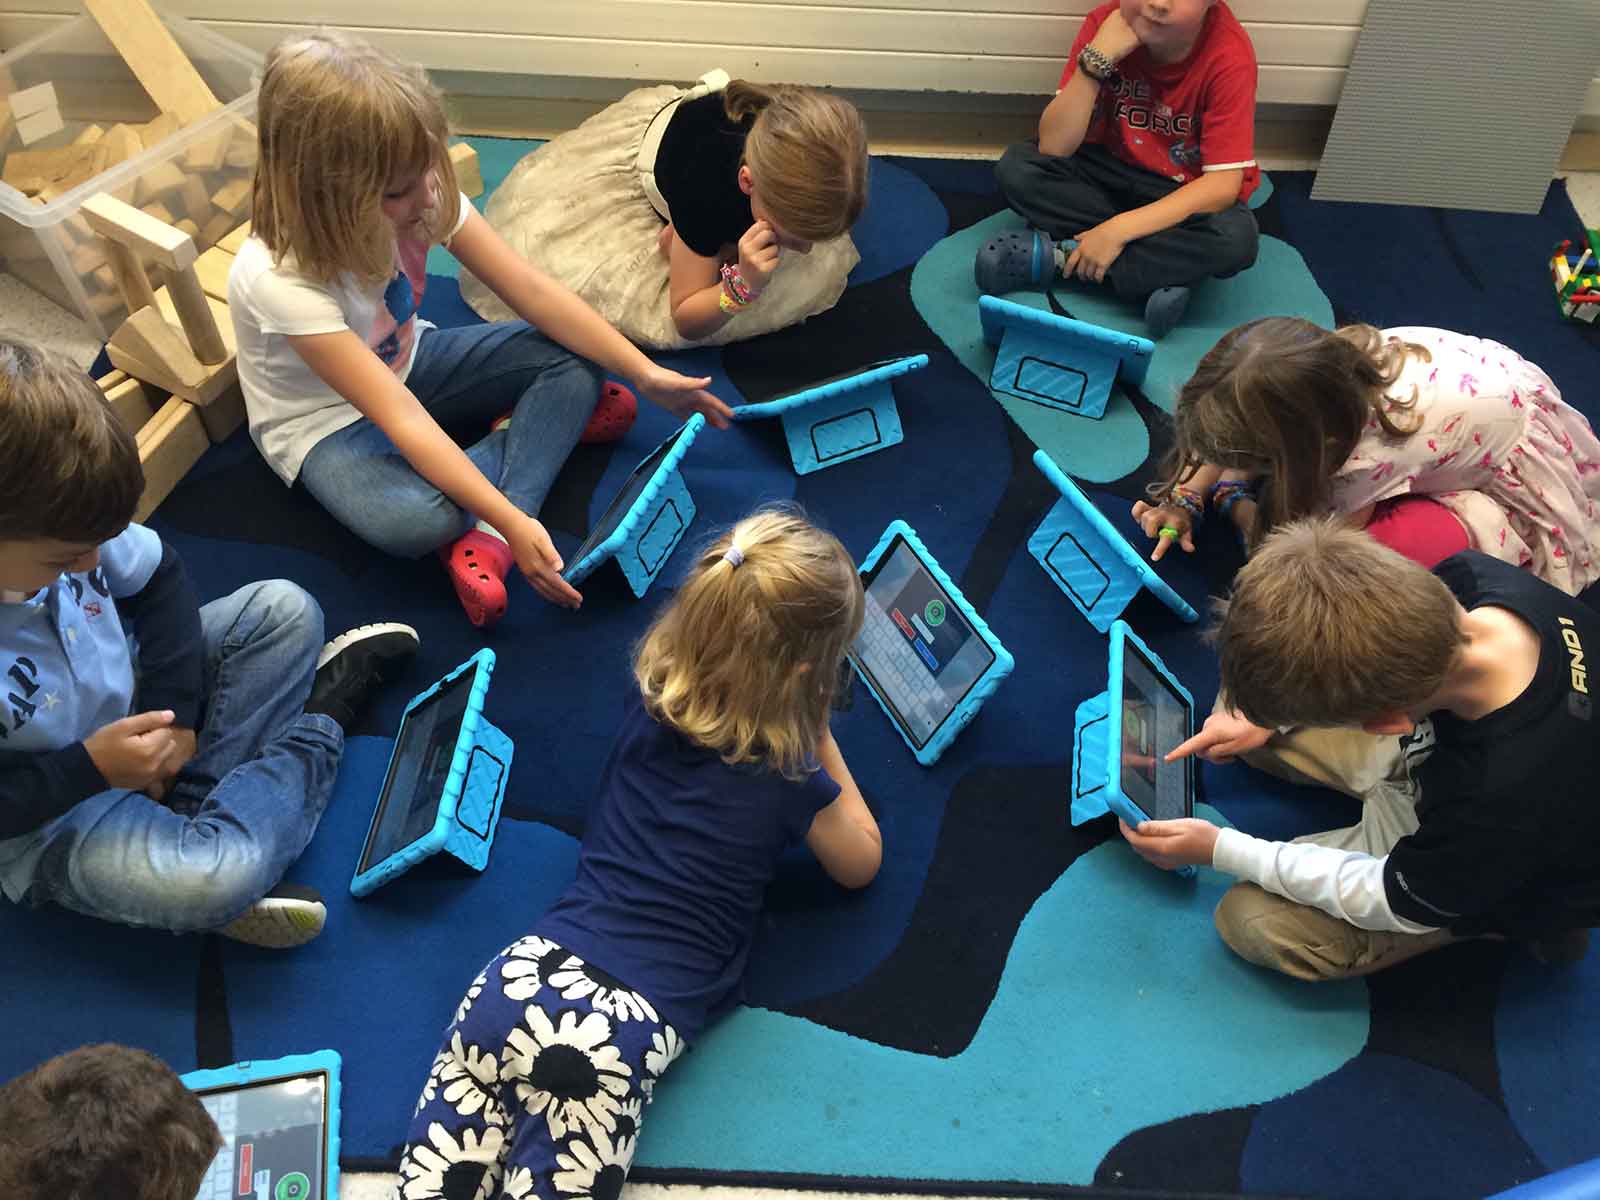 Children look on touch screen devices to learn.